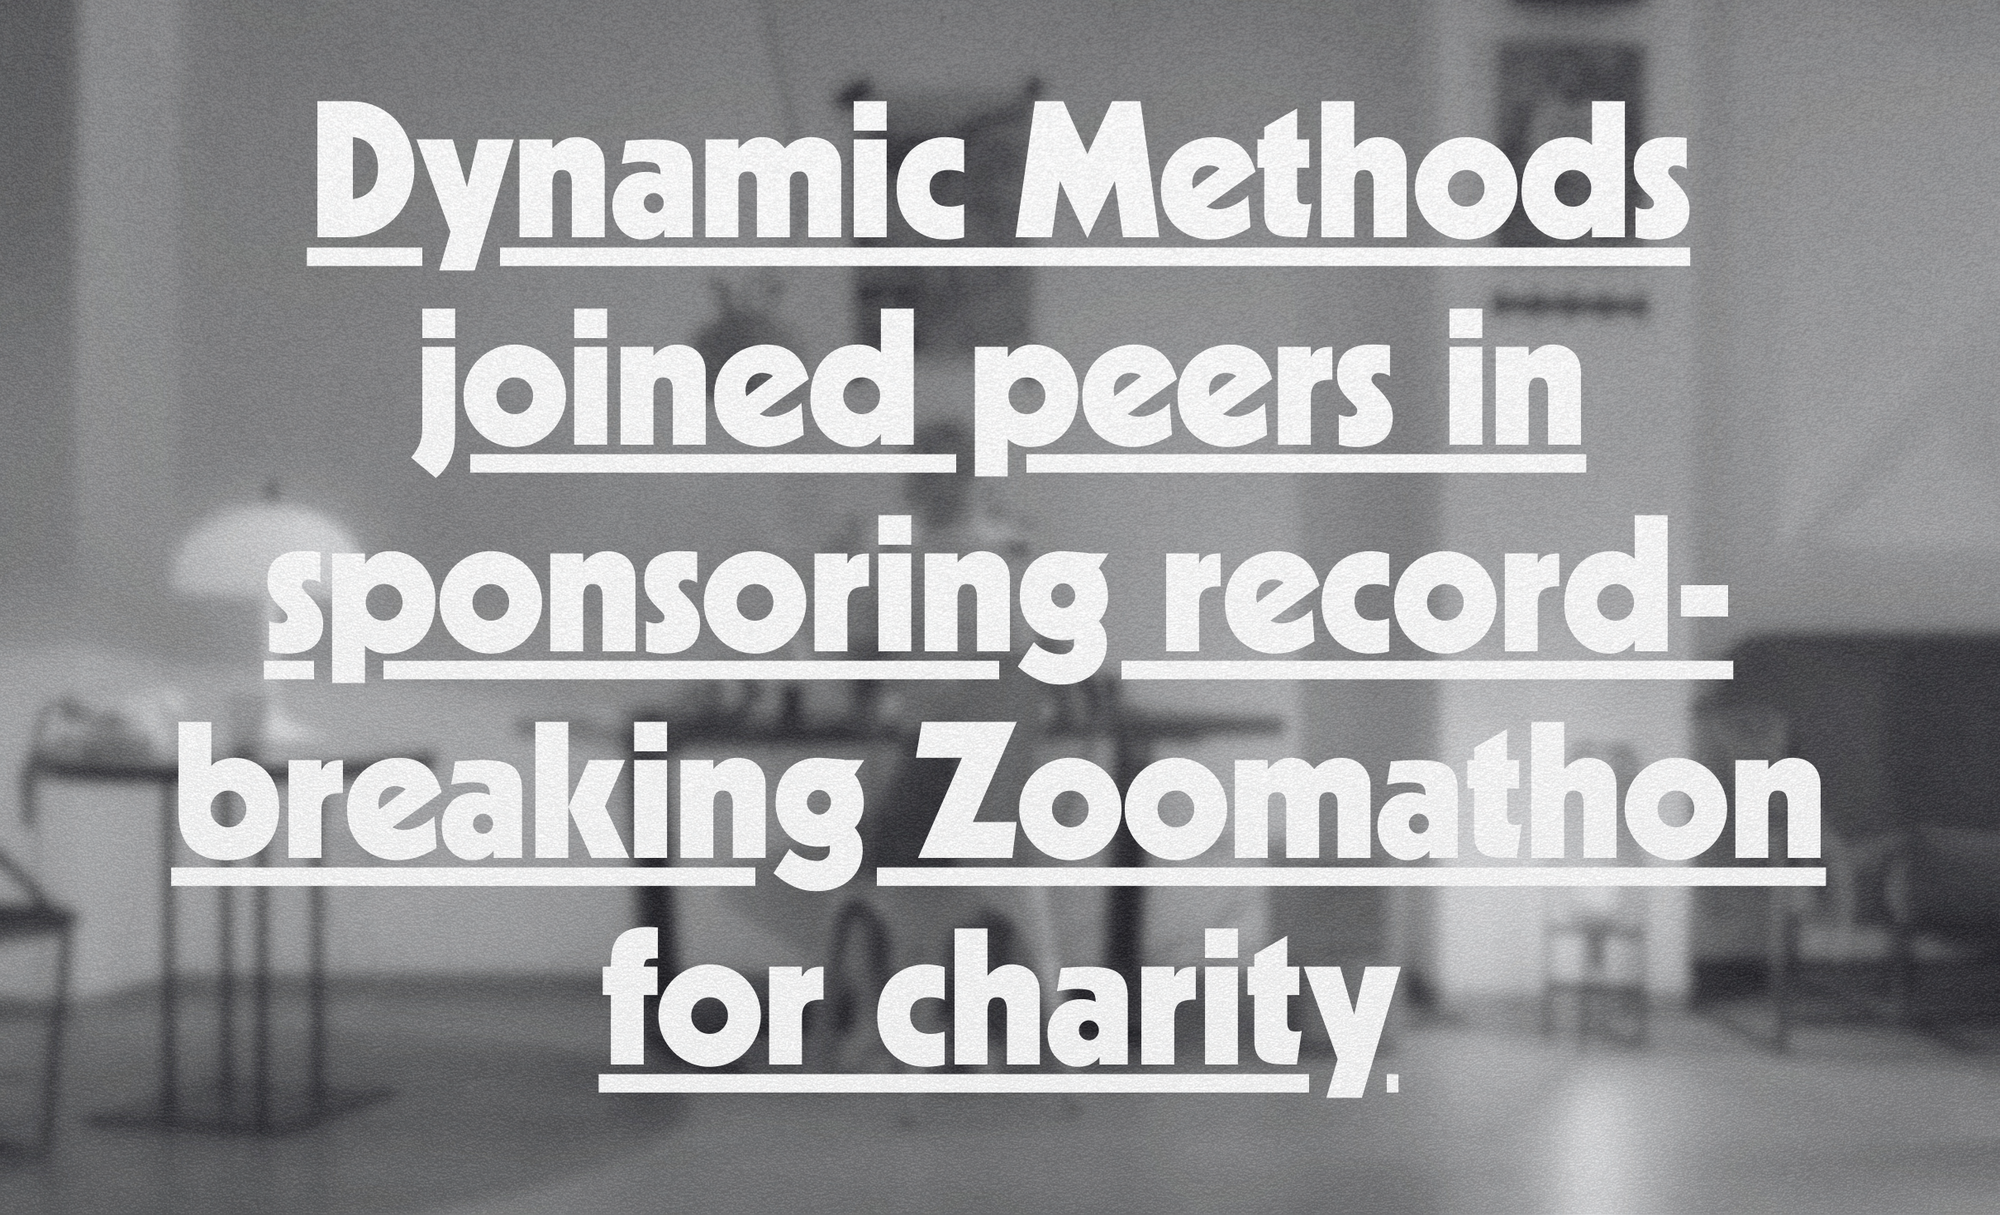 Dynamic Methods joined peers in sponsoring record-breaking Zoomathon for charity